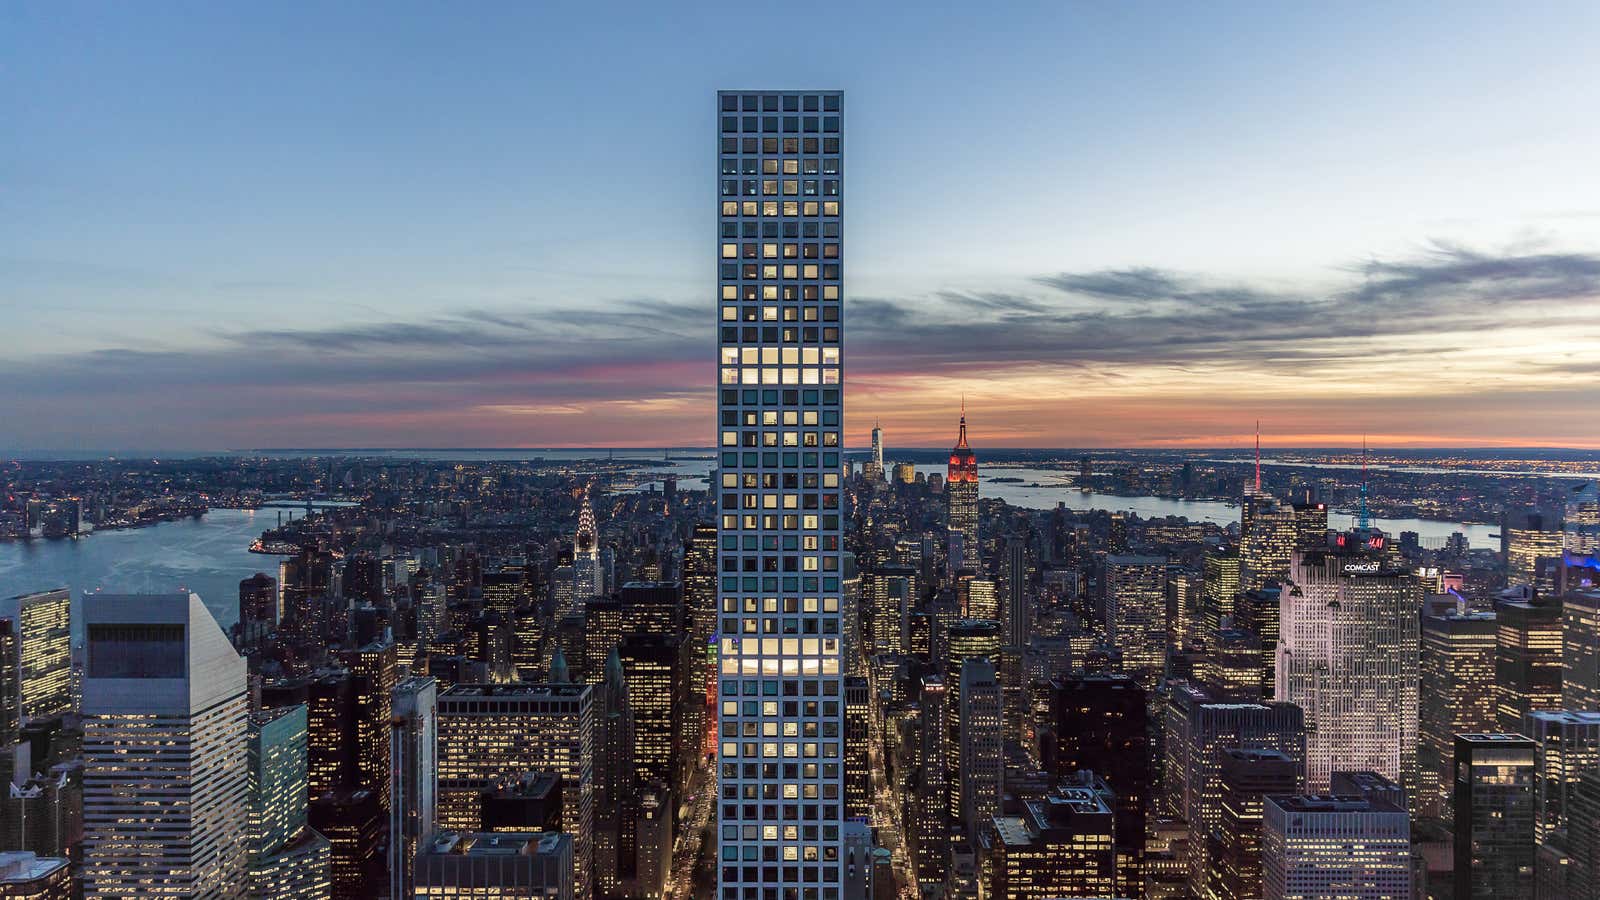 432 Park Ave could be the most coveted address in the world.